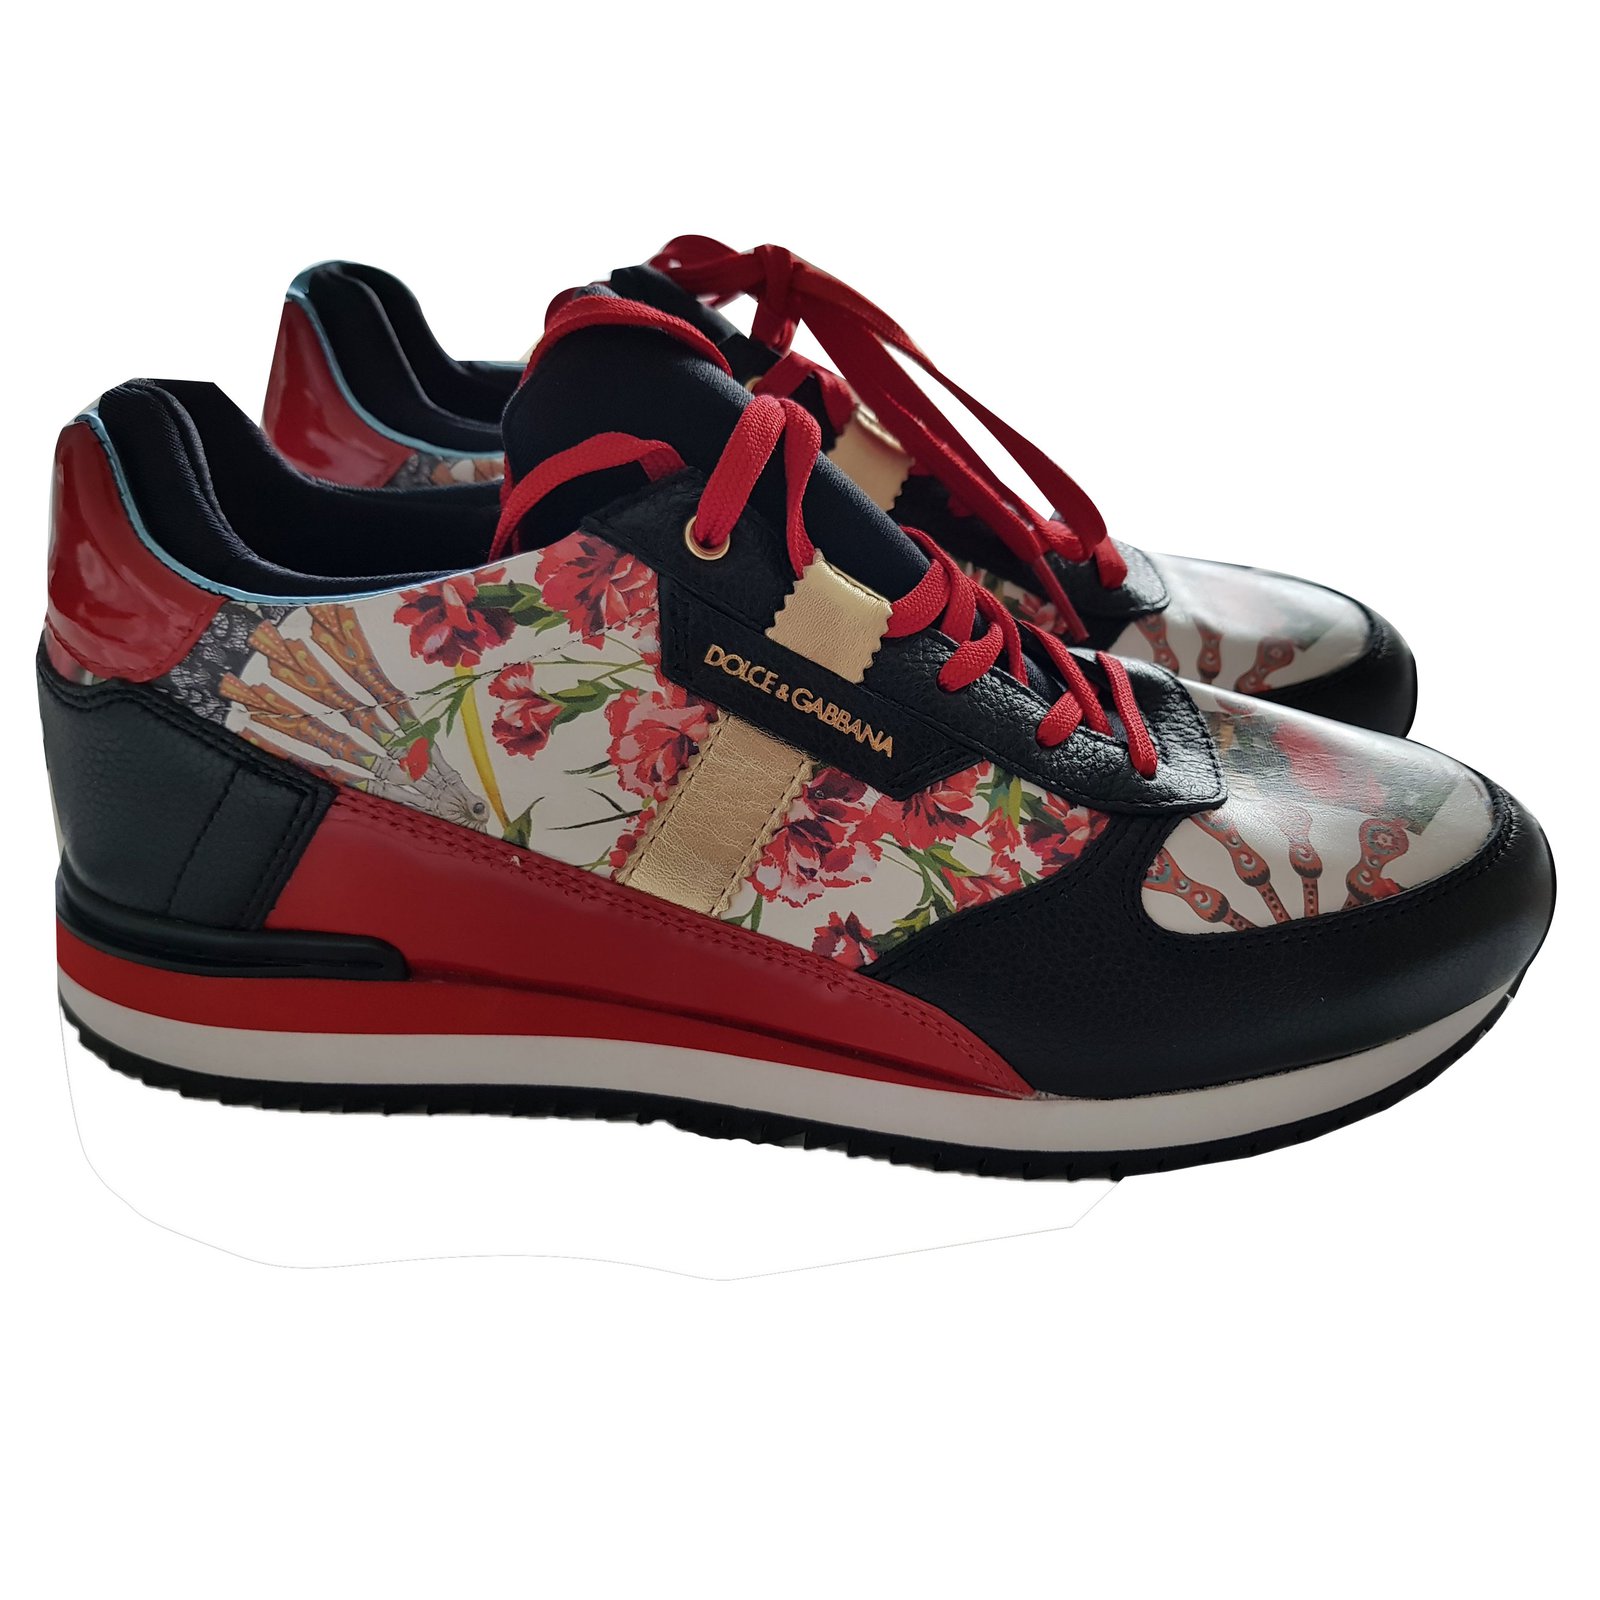 dolce & gabbana sneakers red